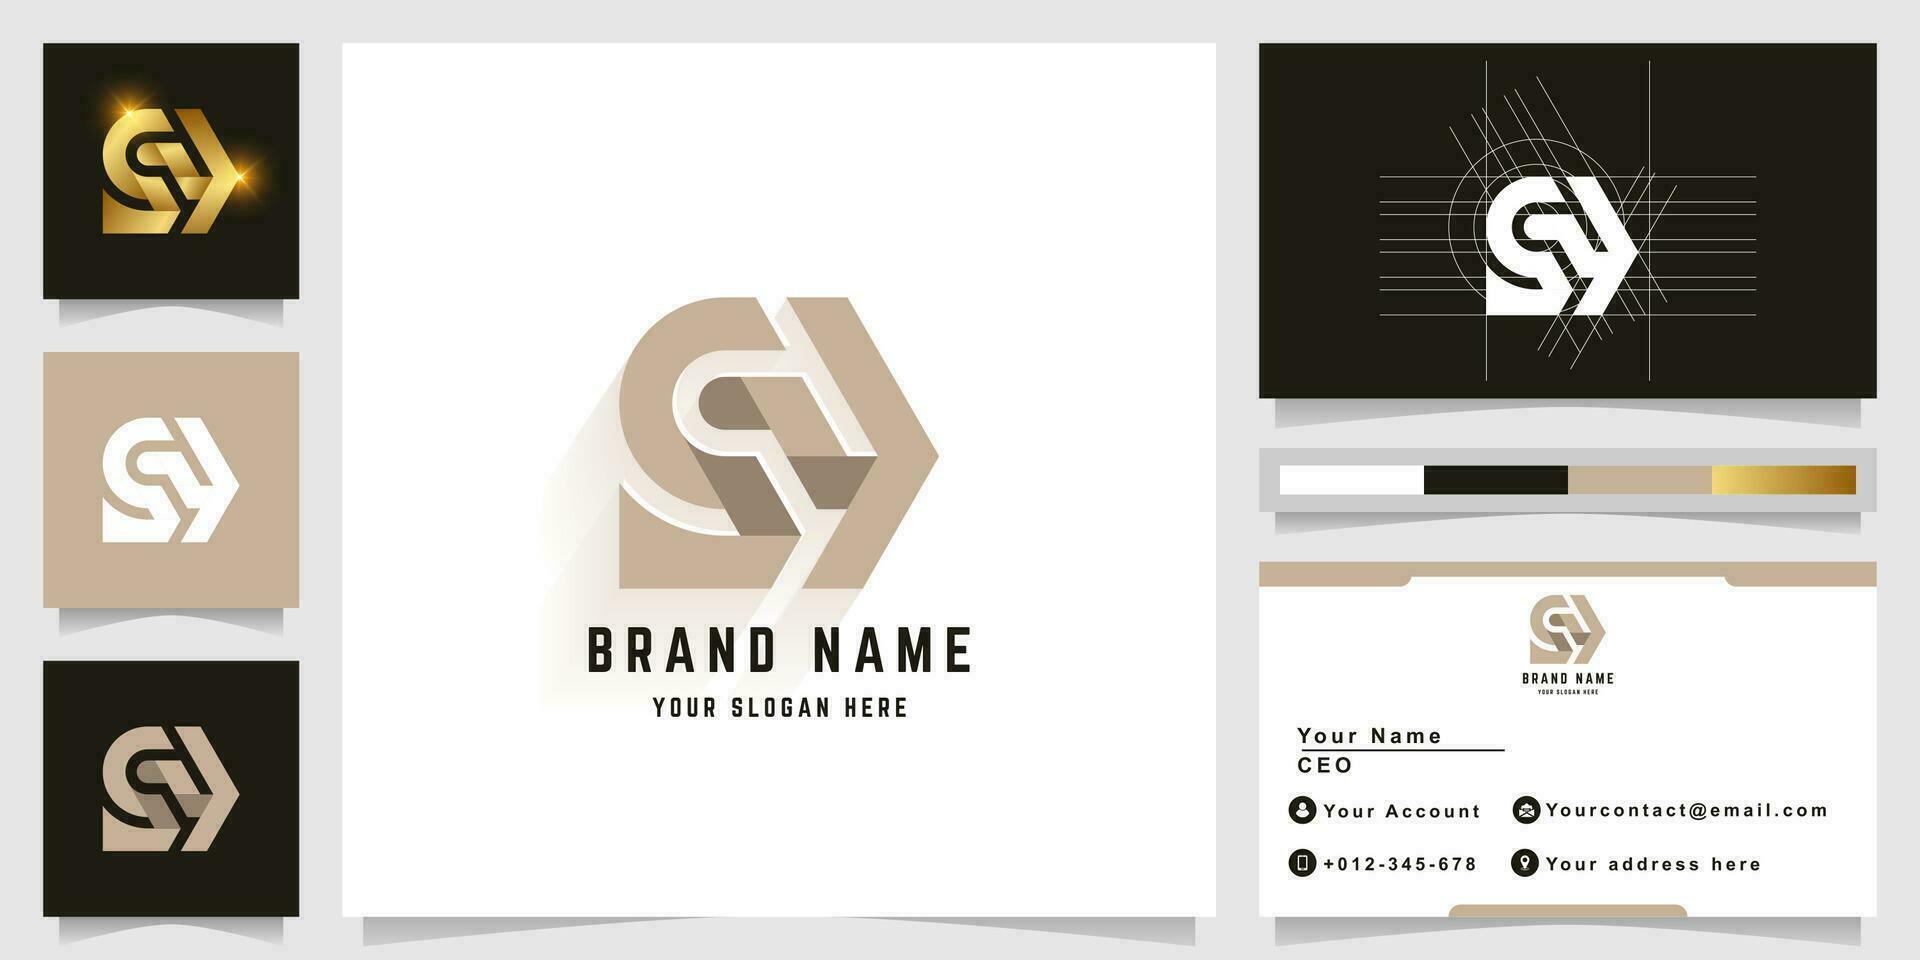 Letter SY or SGY monogram logo with business card design vector